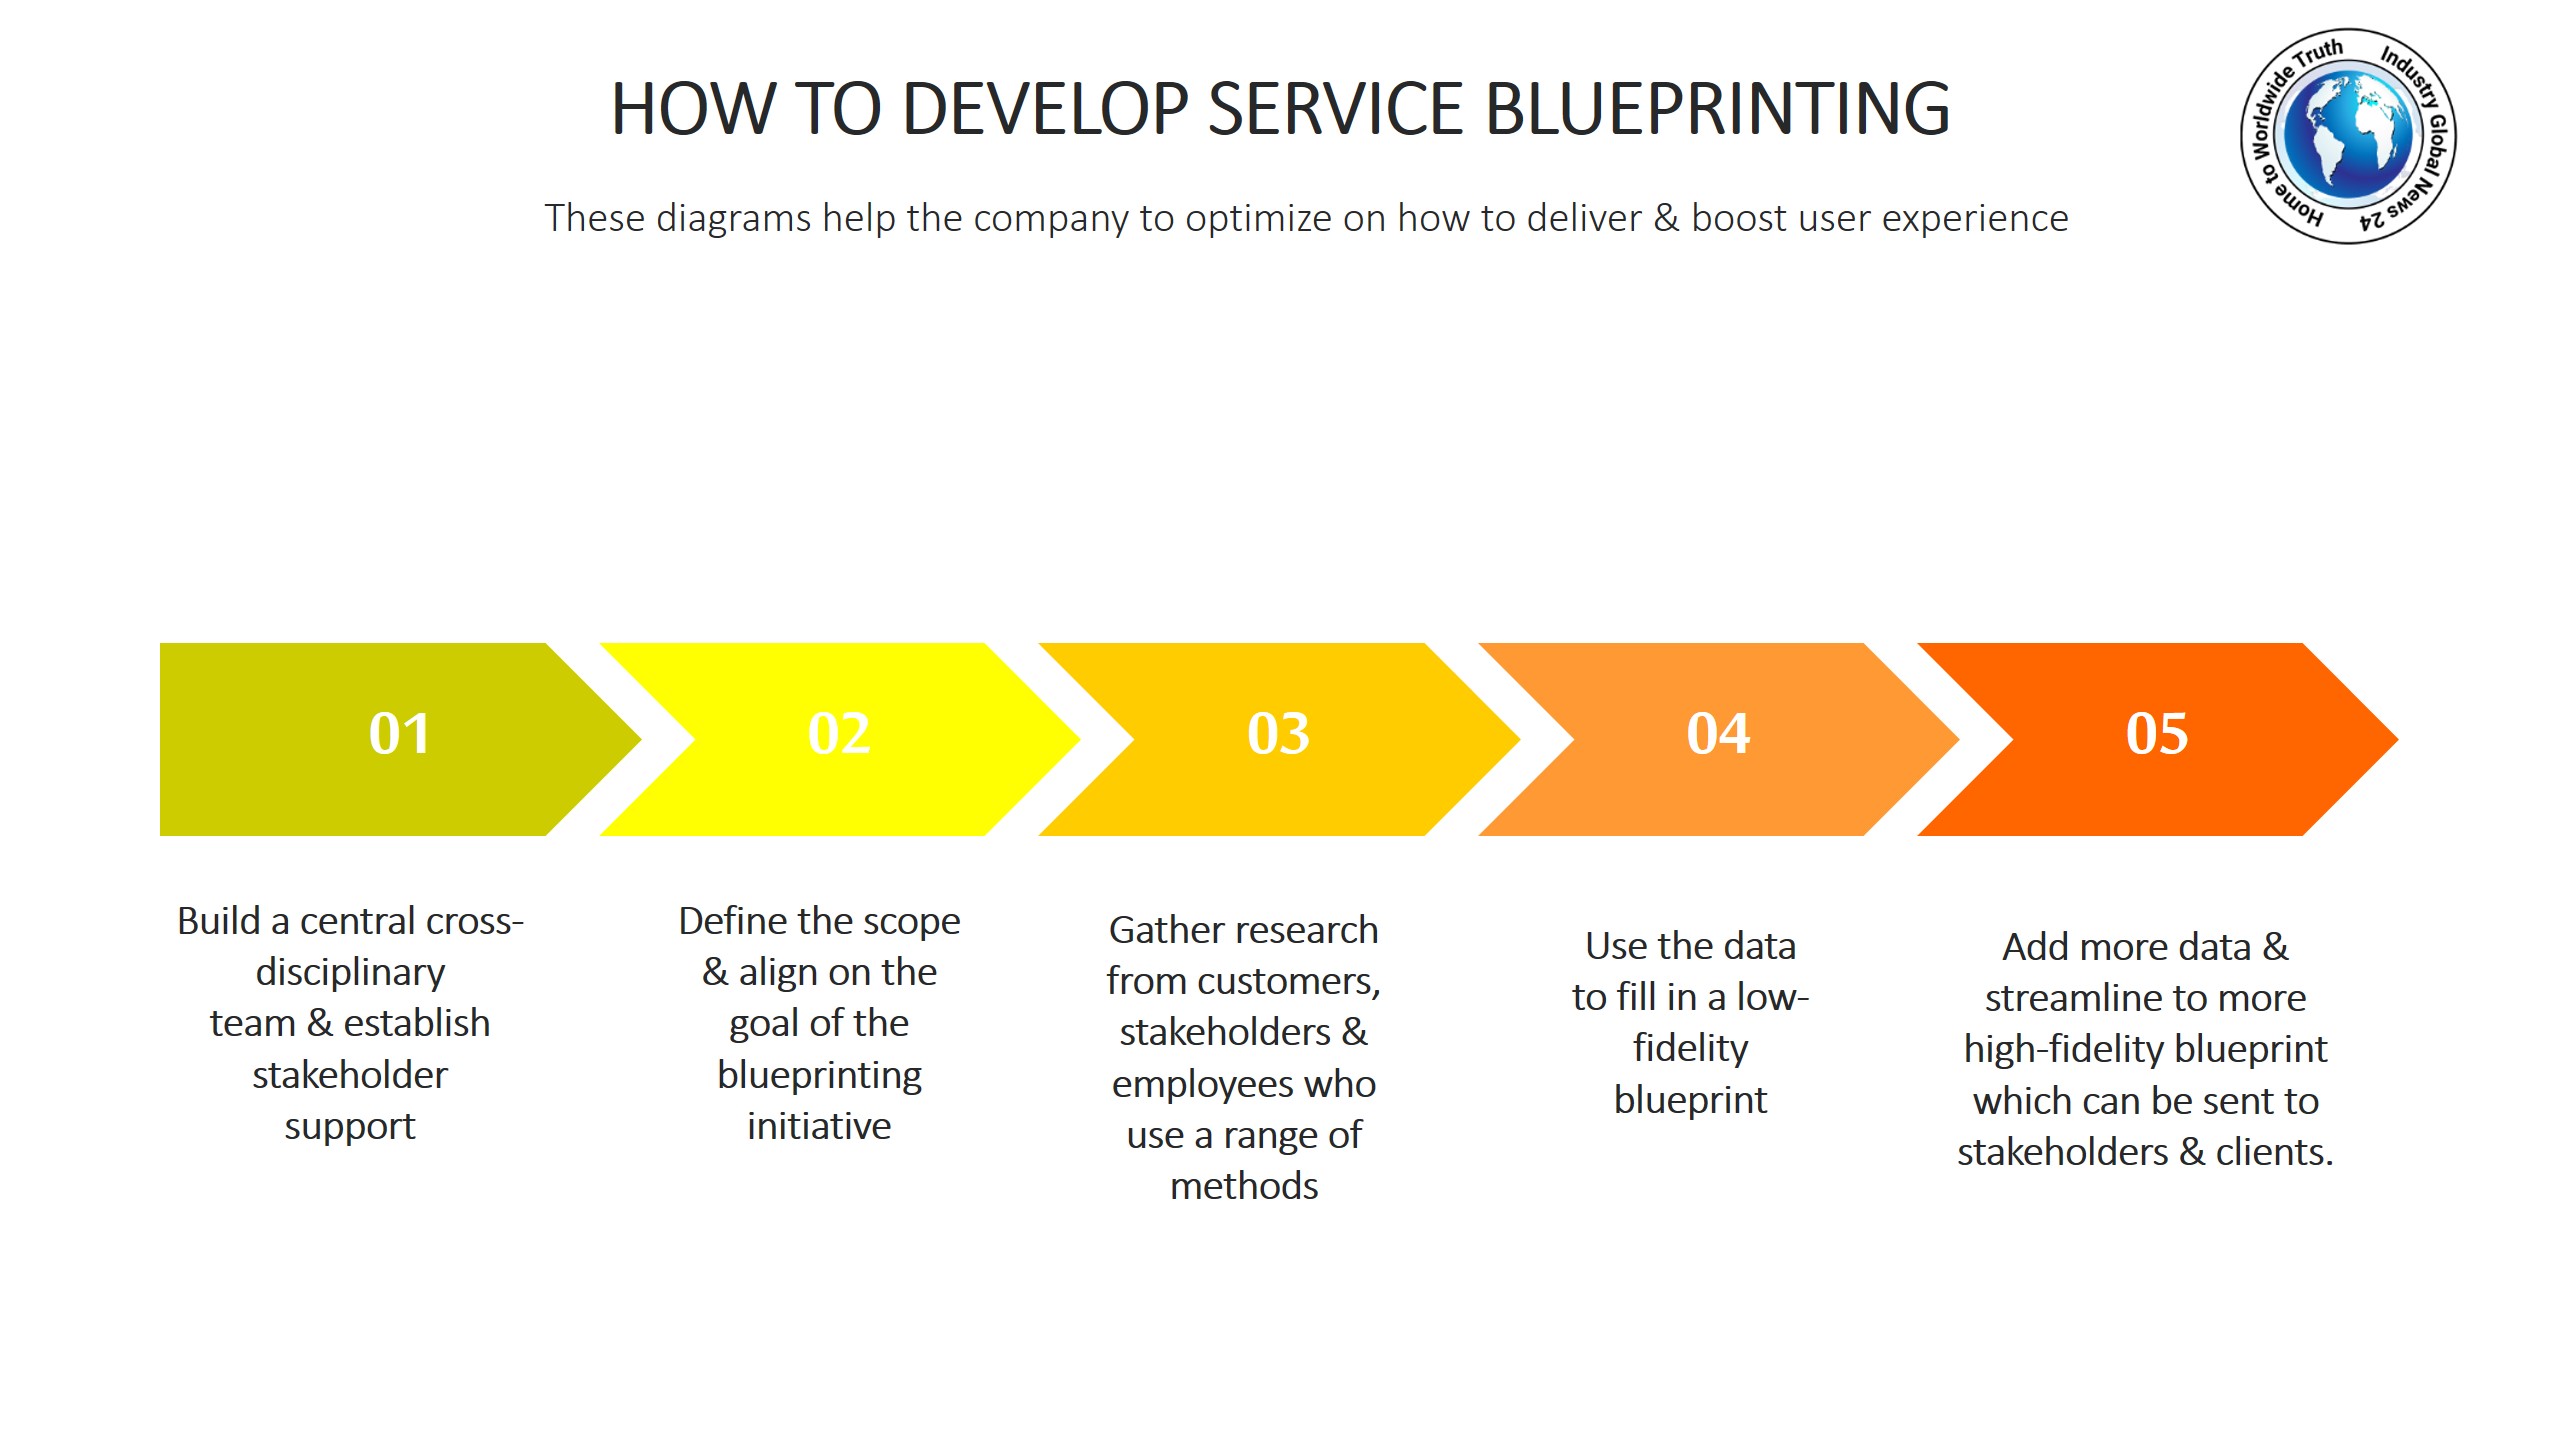 How to develop service blueprinting